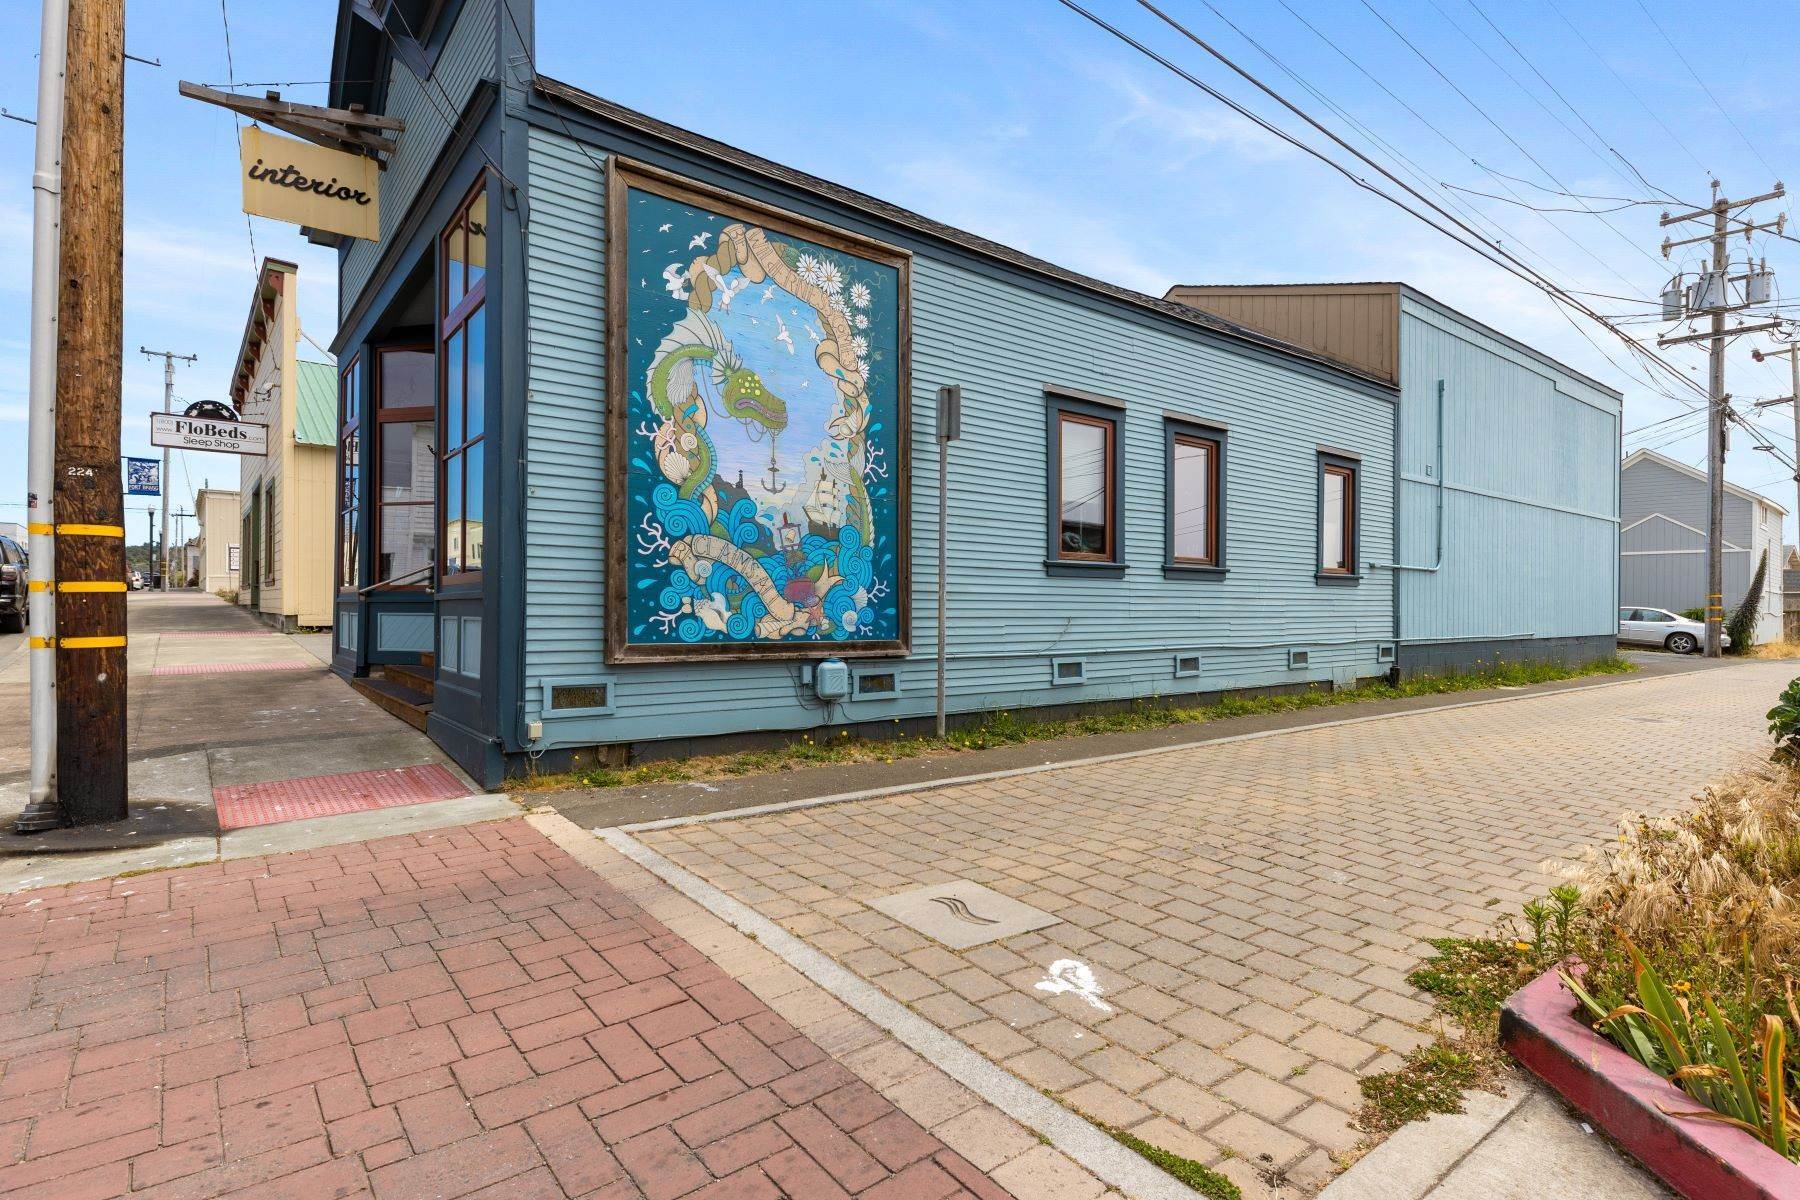 4. Property for Sale at Interior's Retail Building 224 E Redwood Fort Bragg, California 95437 United States